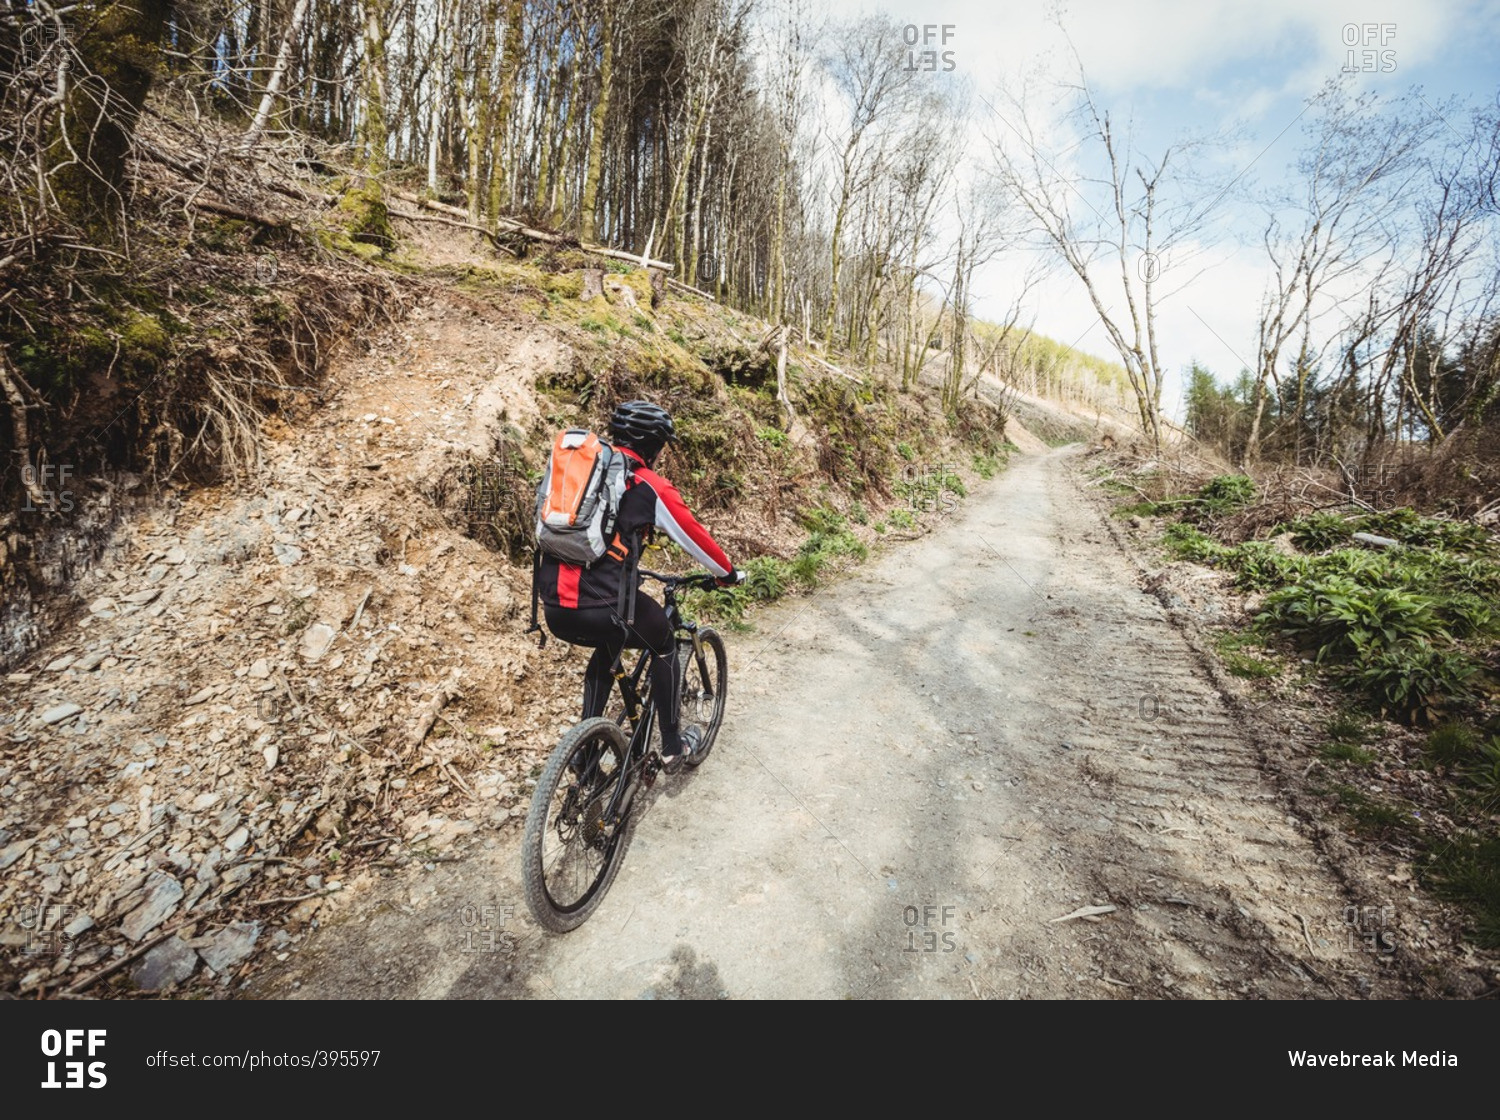 Rear view of mountain biker riding on dirt road on mountain